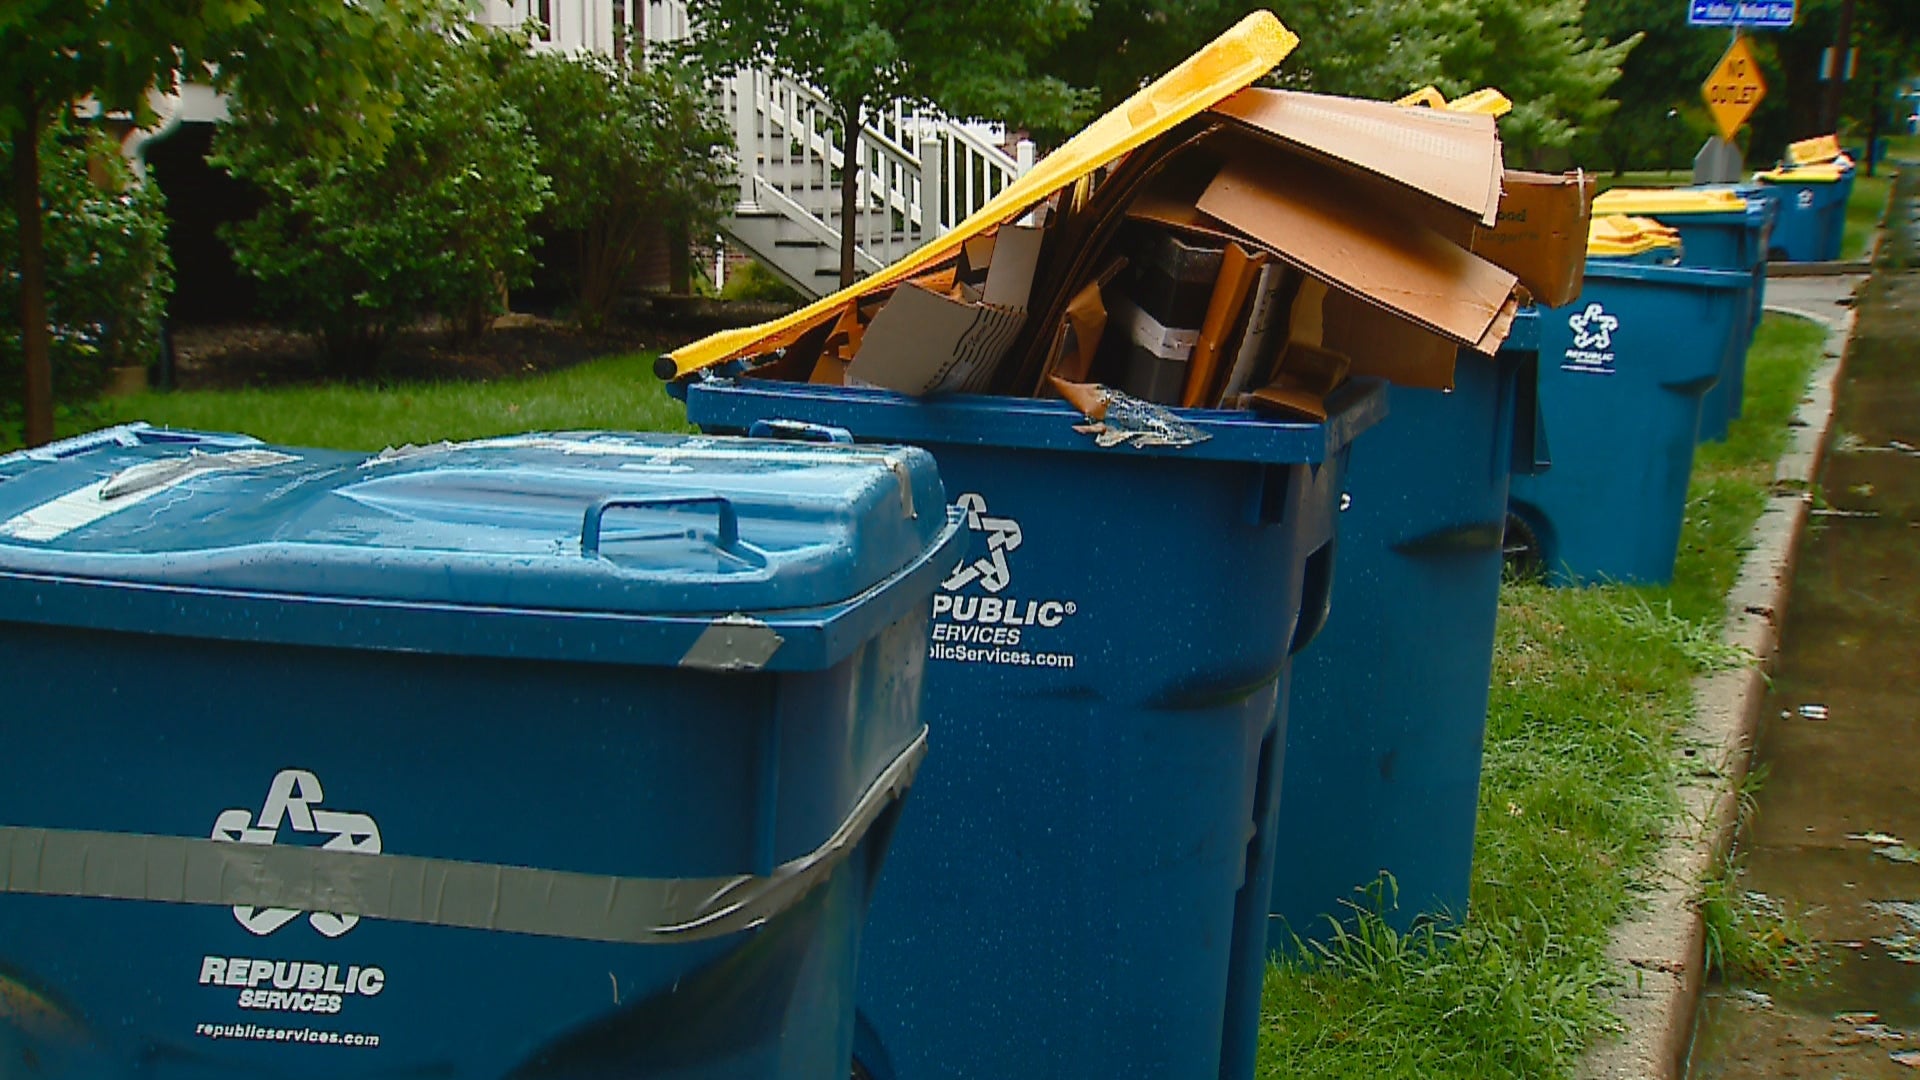 Public Works reassigns drivers to address heavytrash pickup issues